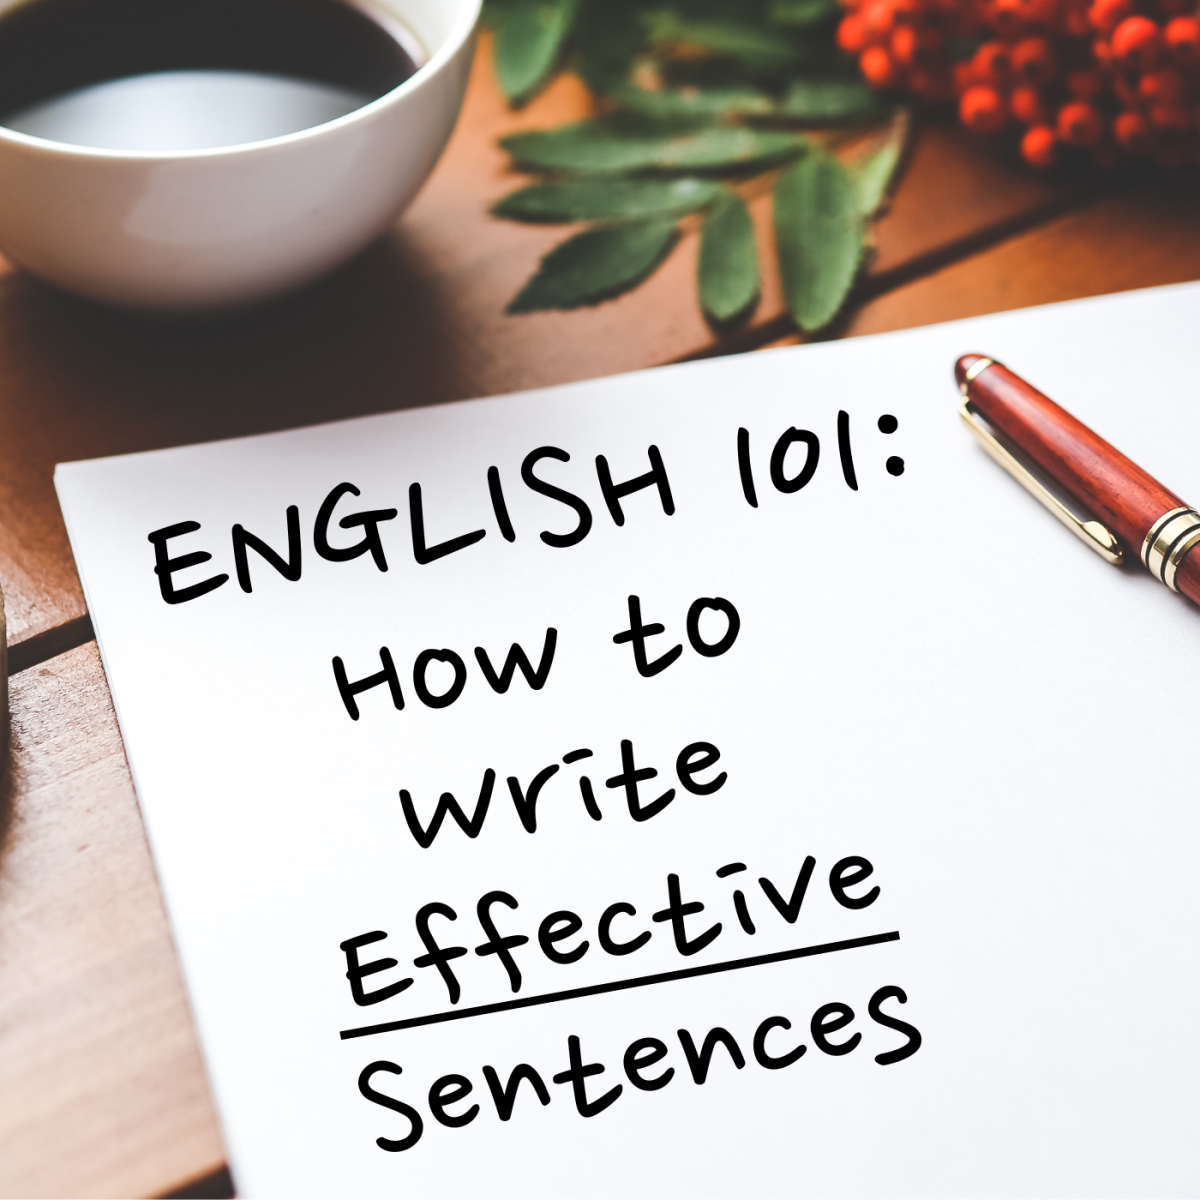 Writing Effective Sentences in Your English Essay